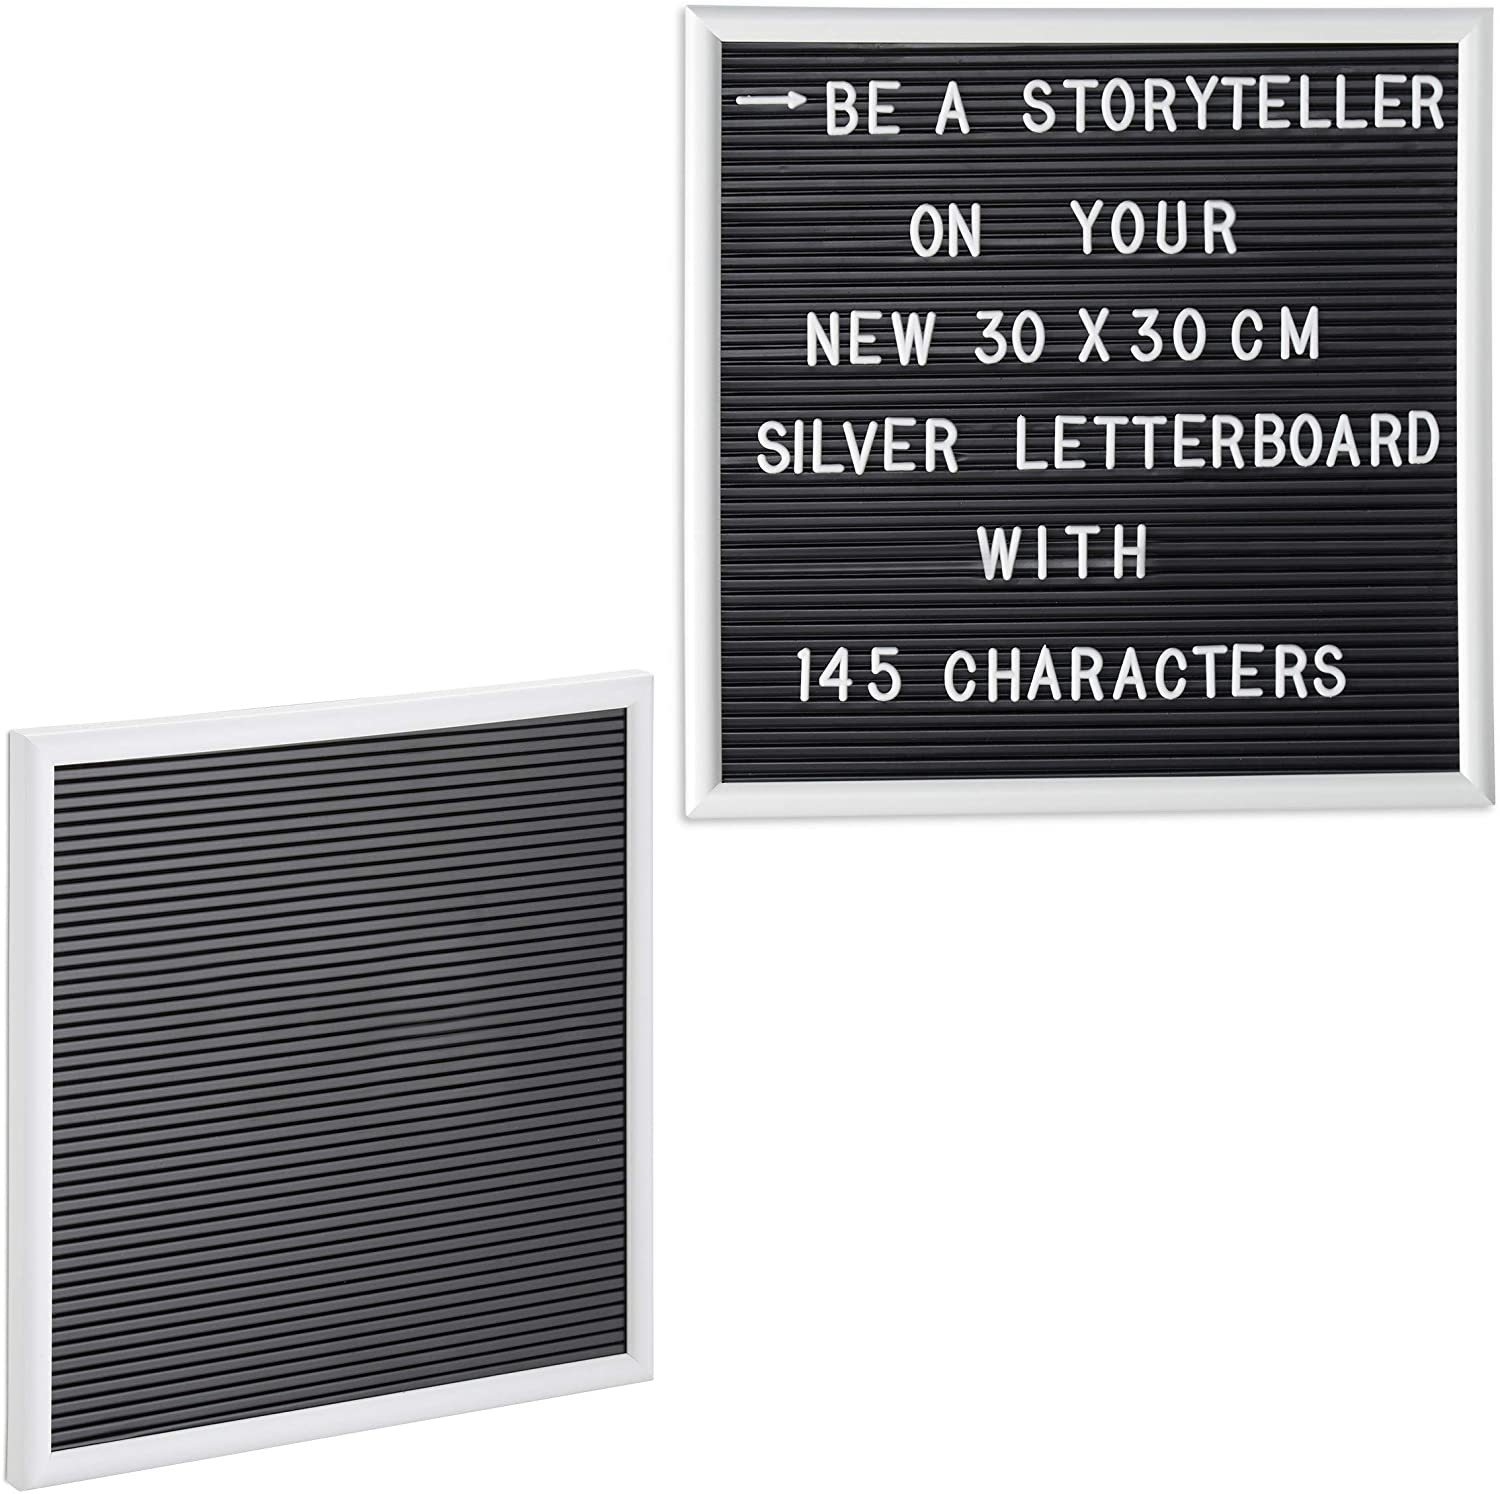 Relaxdays 2 x Letter Board, 145 Letters, Numbers, Special Characters, 30 x 30 cm, Letter Board for Sticking, Plastic, White